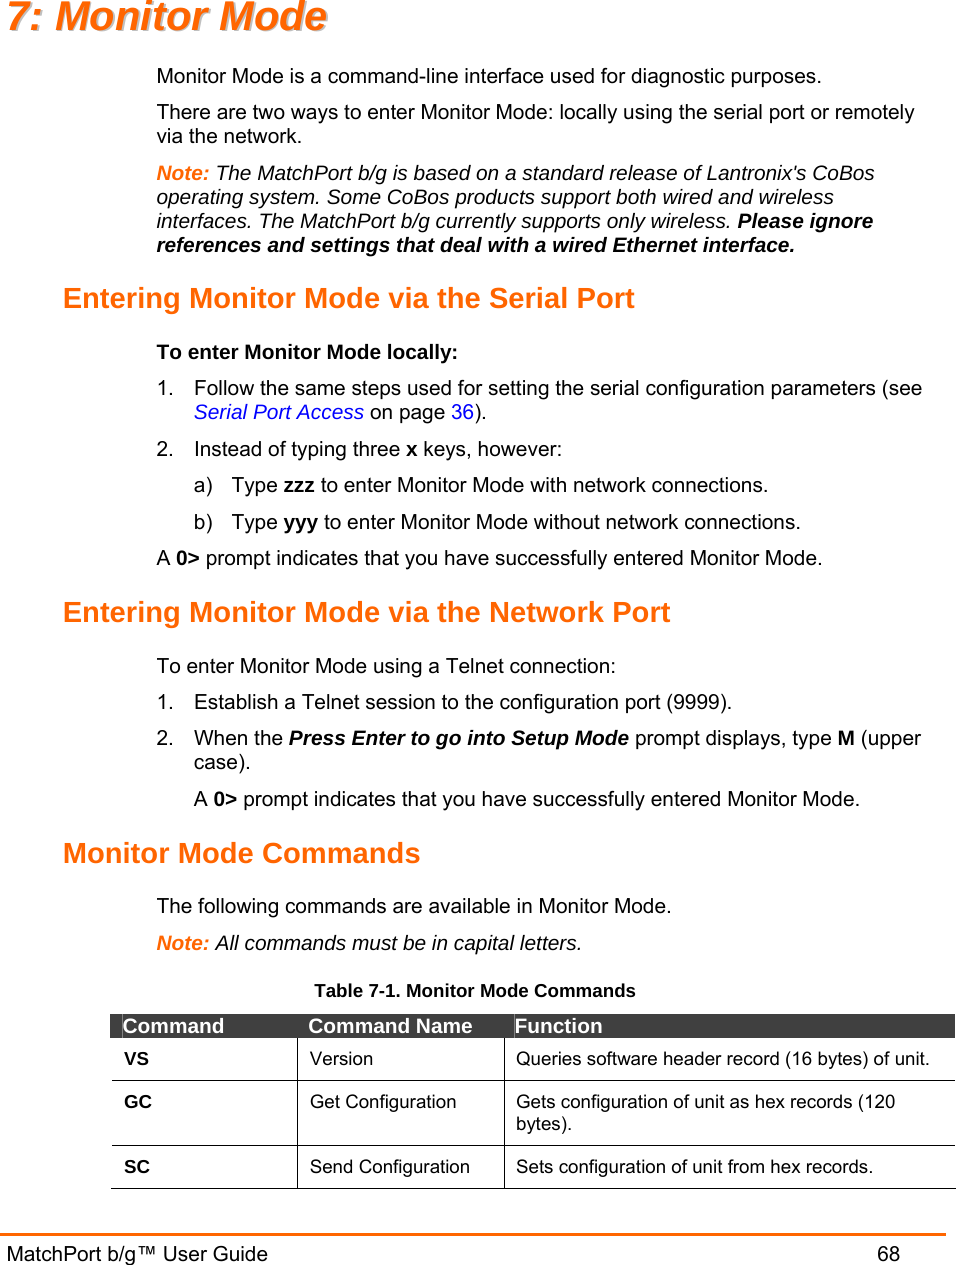   MatchPort b/g™ User Guide  68 77::  MMoonniittoorr  MMooddee  Monitor Mode is a command-line interface used for diagnostic purposes. There are two ways to enter Monitor Mode: locally using the serial port or remotely via the network.  Note: The MatchPort b/g is based on a standard release of Lantronix&apos;s CoBos operating system. Some CoBos products support both wired and wireless interfaces. The MatchPort b/g currently supports only wireless. Please ignore references and settings that deal with a wired Ethernet interface. Entering Monitor Mode via the Serial Port To enter Monitor Mode locally: 1.  Follow the same steps used for setting the serial configuration parameters (see Serial Port Access on page 36). 2.  Instead of typing three x keys, however: a) Type zzz to enter Monitor Mode with network connections. b) Type yyy to enter Monitor Mode without network connections. A 0&gt; prompt indicates that you have successfully entered Monitor Mode. Entering Monitor Mode via the Network Port To enter Monitor Mode using a Telnet connection: 1.  Establish a Telnet session to the configuration port (9999). 2. When the Press Enter to go into Setup Mode prompt displays, type M (upper case). A 0&gt; prompt indicates that you have successfully entered Monitor Mode. Monitor Mode Commands The following commands are available in Monitor Mode. Note: All commands must be in capital letters.  Table 7-1. Monitor Mode Commands Command  Command Name  Function VS  Version  Queries software header record (16 bytes) of unit. GC  Get Configuration  Gets configuration of unit as hex records (120 bytes). SC  Send Configuration  Sets configuration of unit from hex records. 